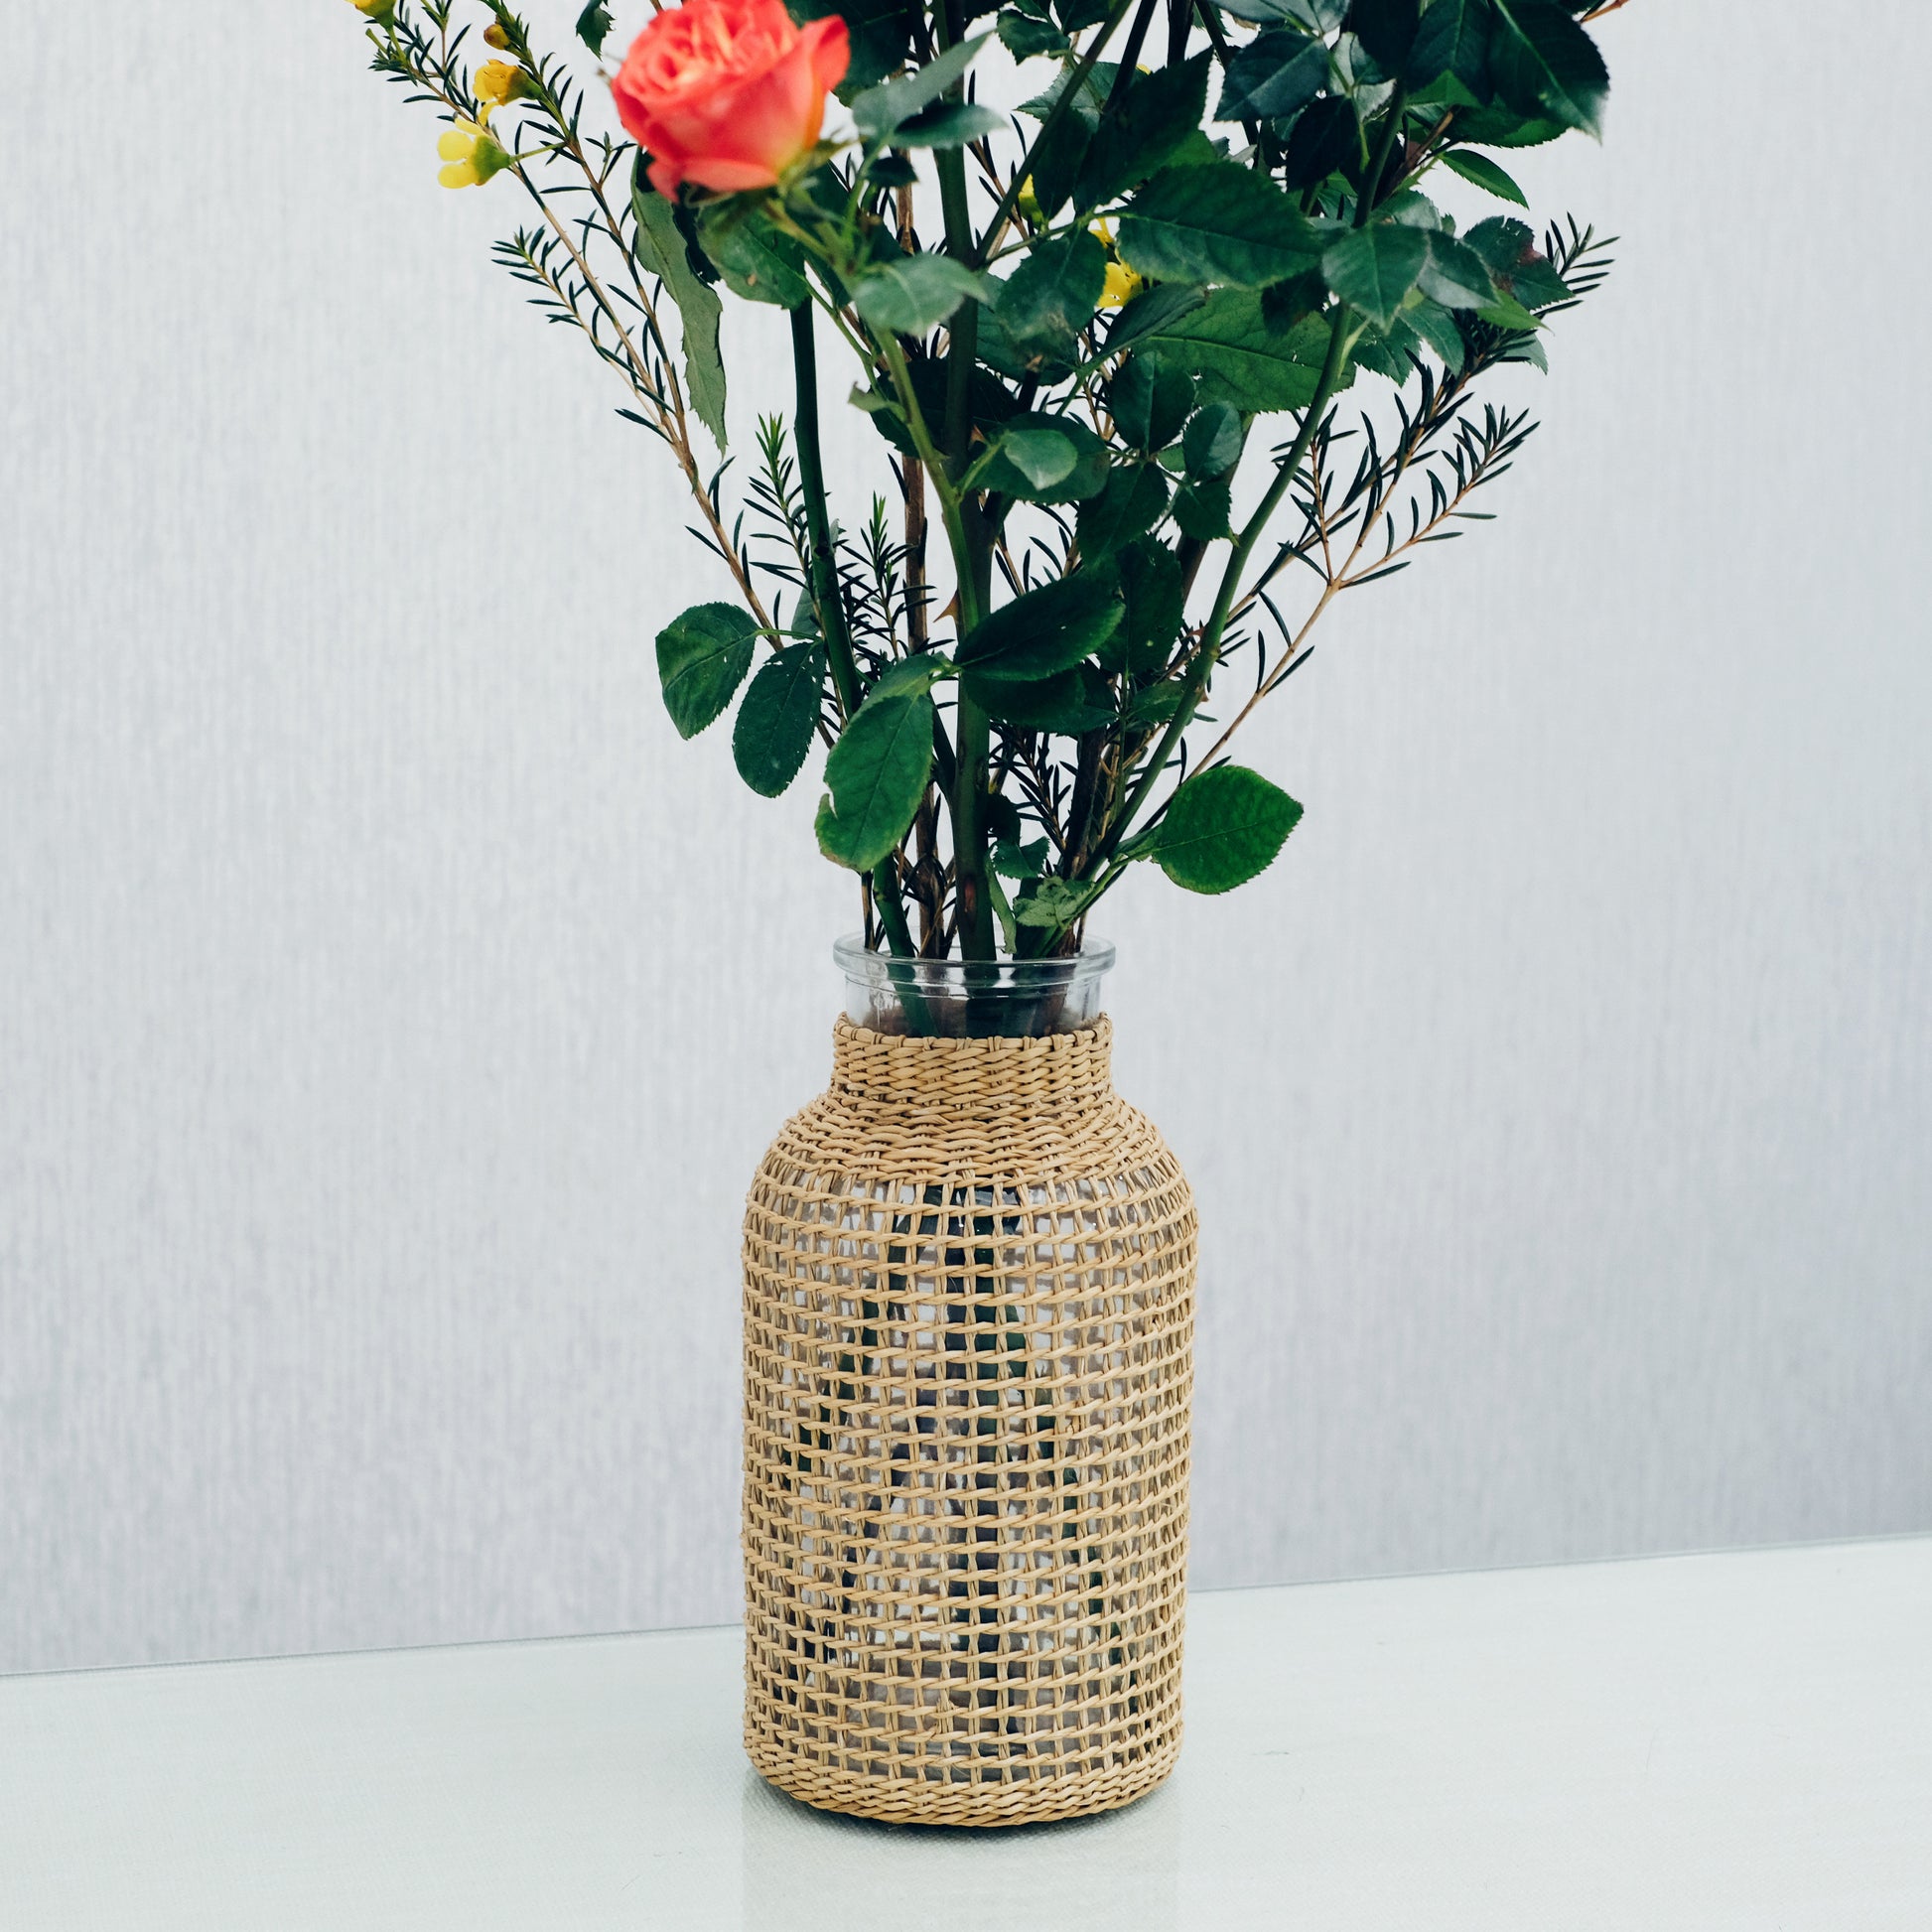 large-flower-glass-vase-with-hand-woven-straw-cover